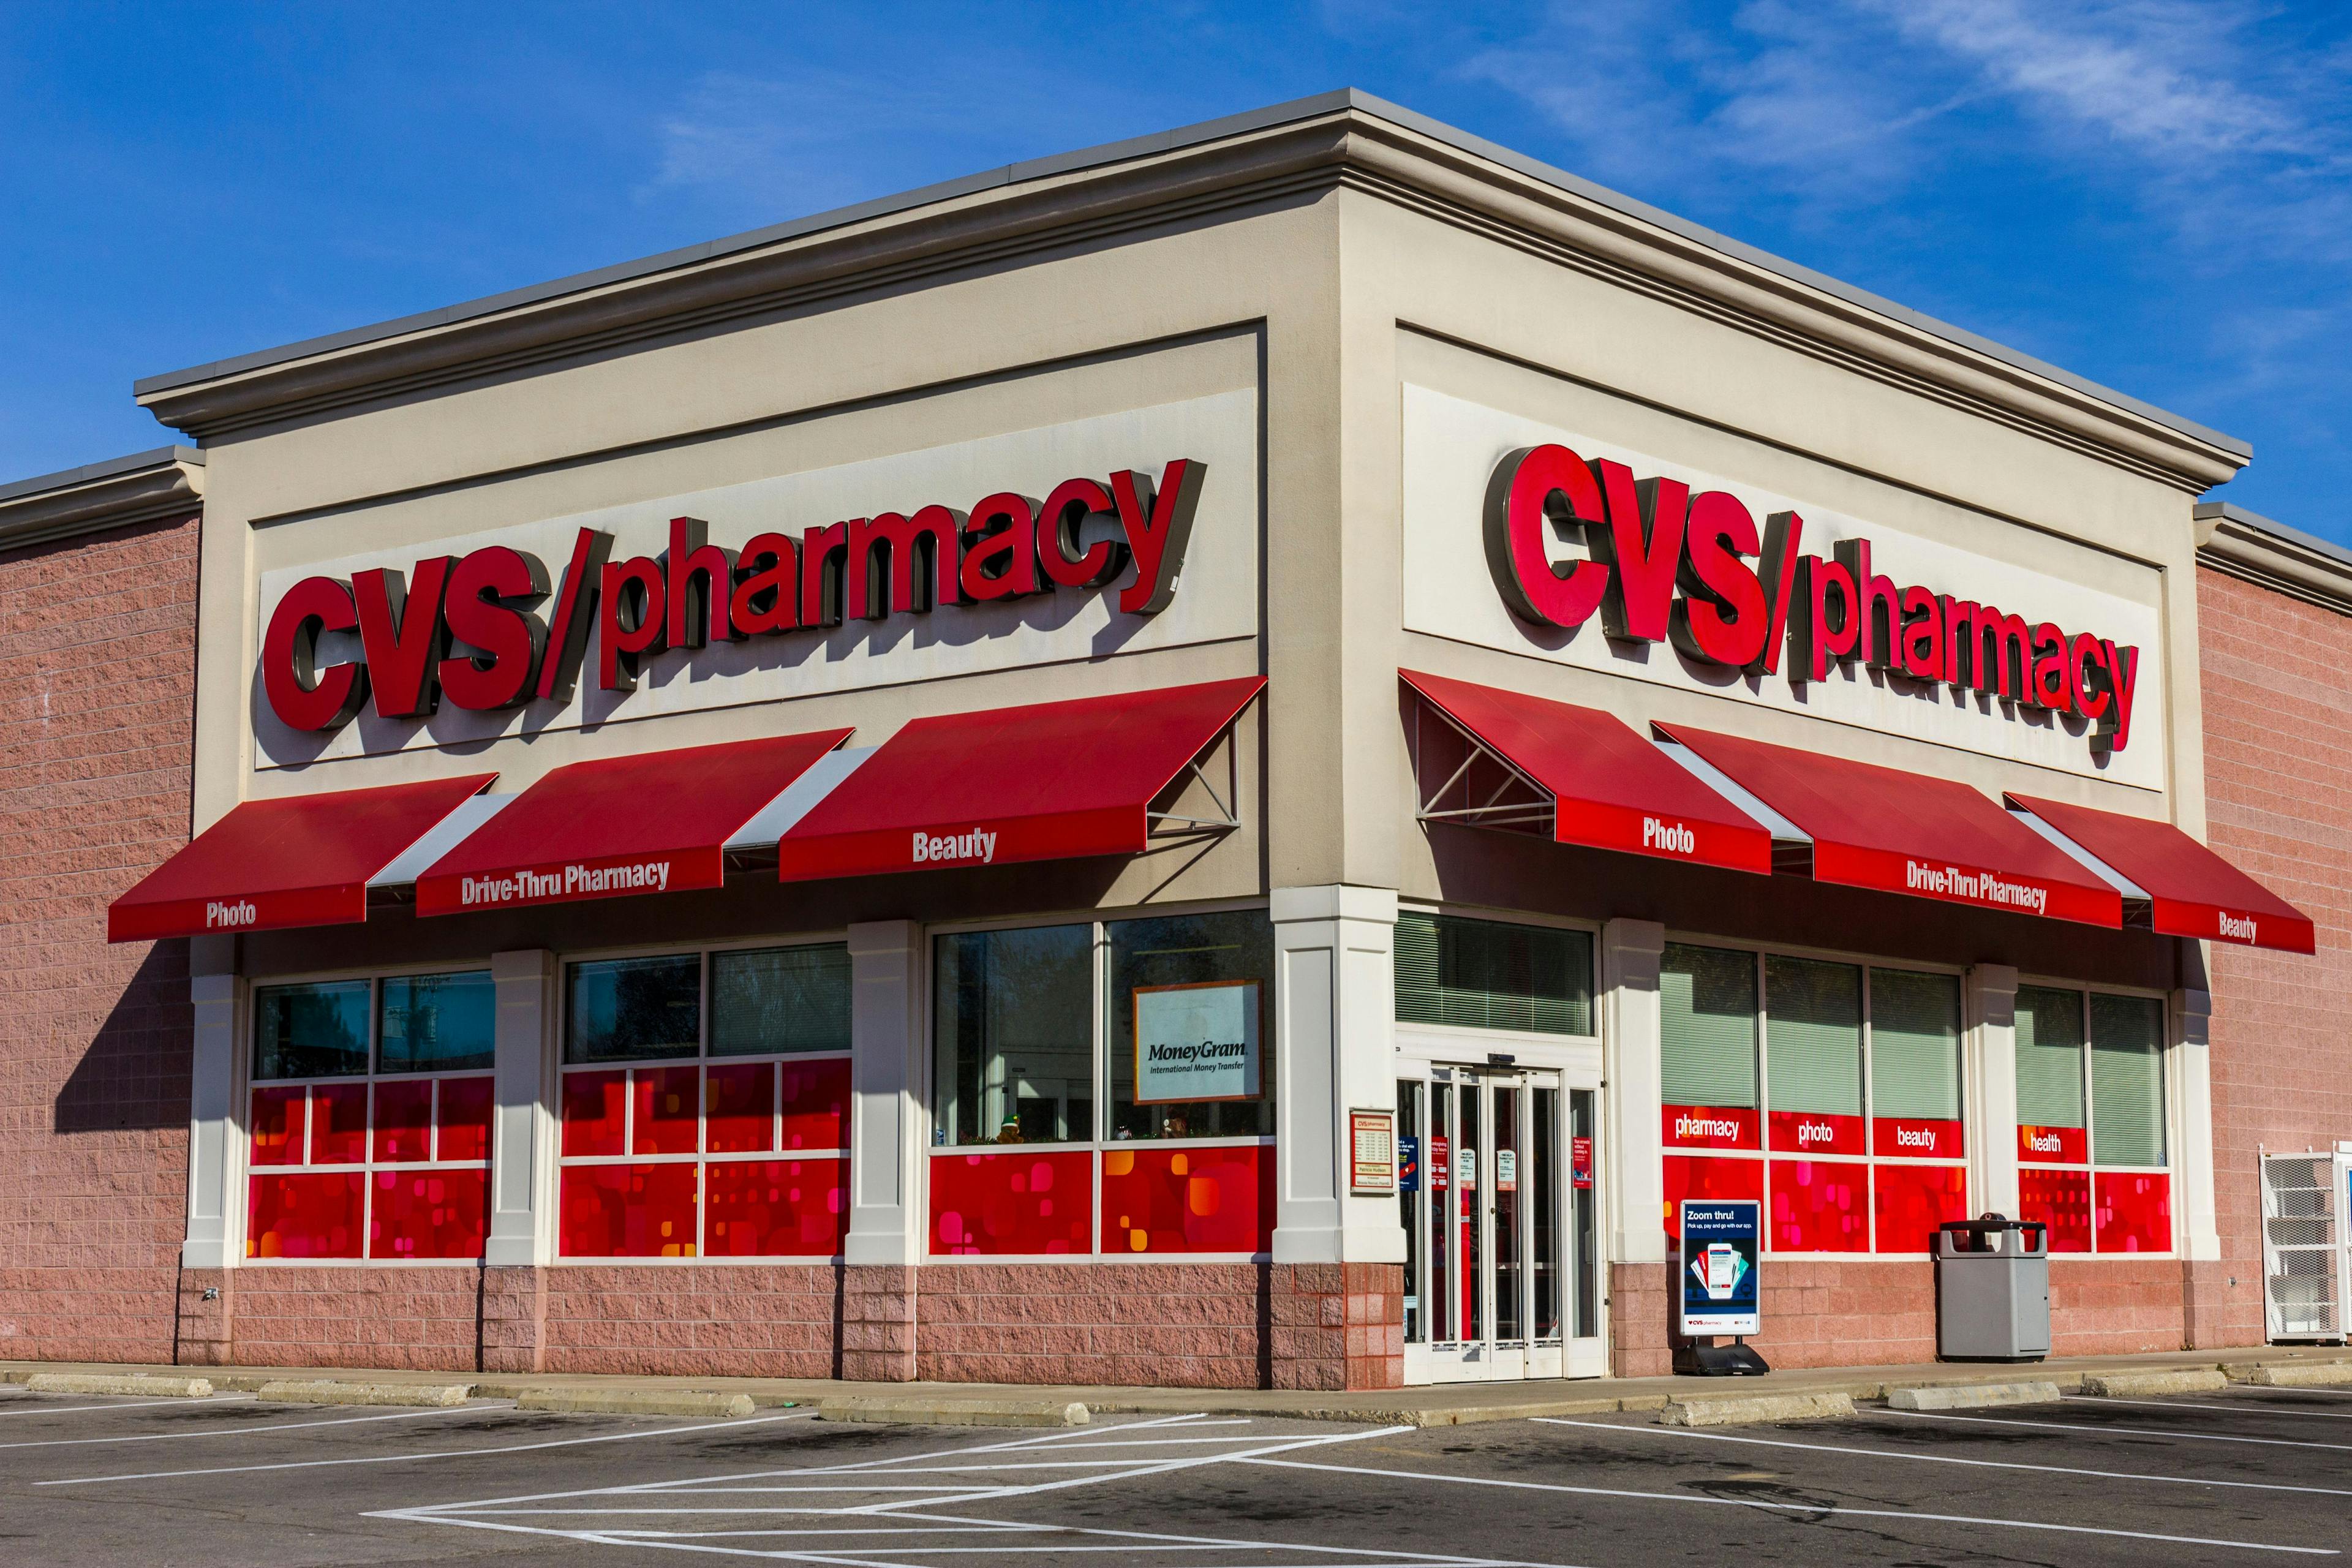 Understaffing at CVS Pharmacies in Ohio Lead to Concerns About Patient Safety